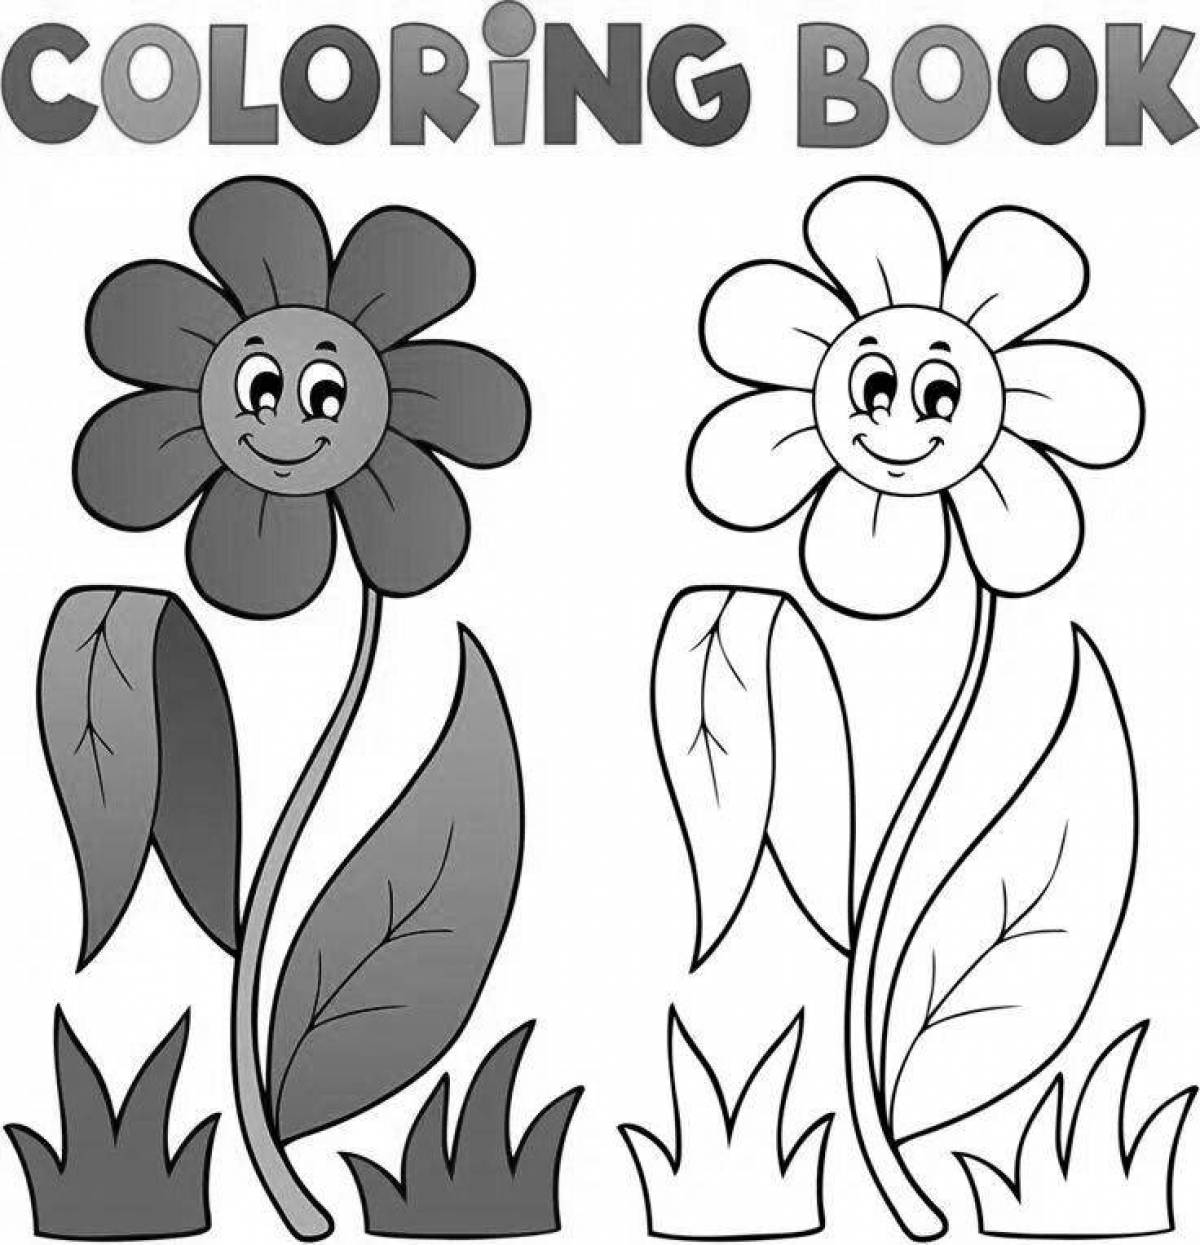 Exciting flower coloring for heroes